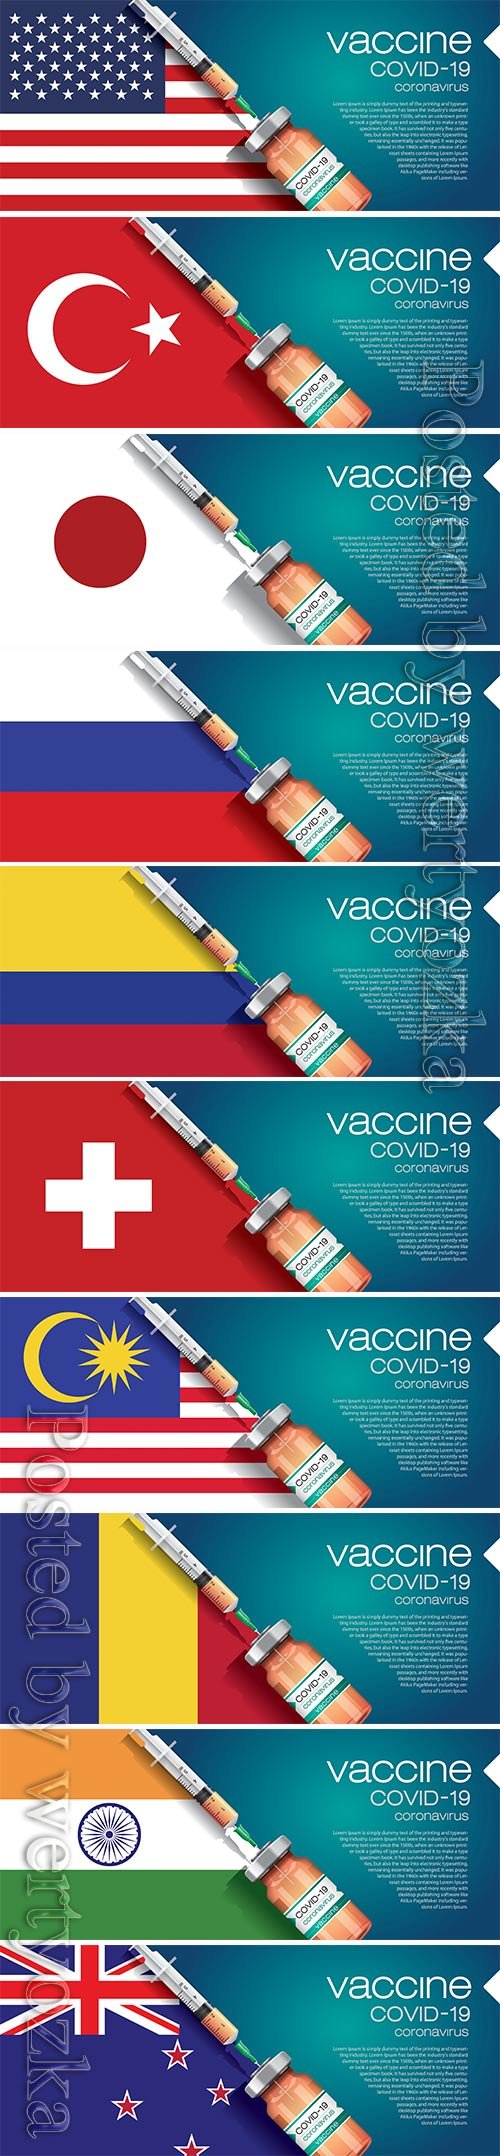 3D corona vaccine illustration and country flag concept